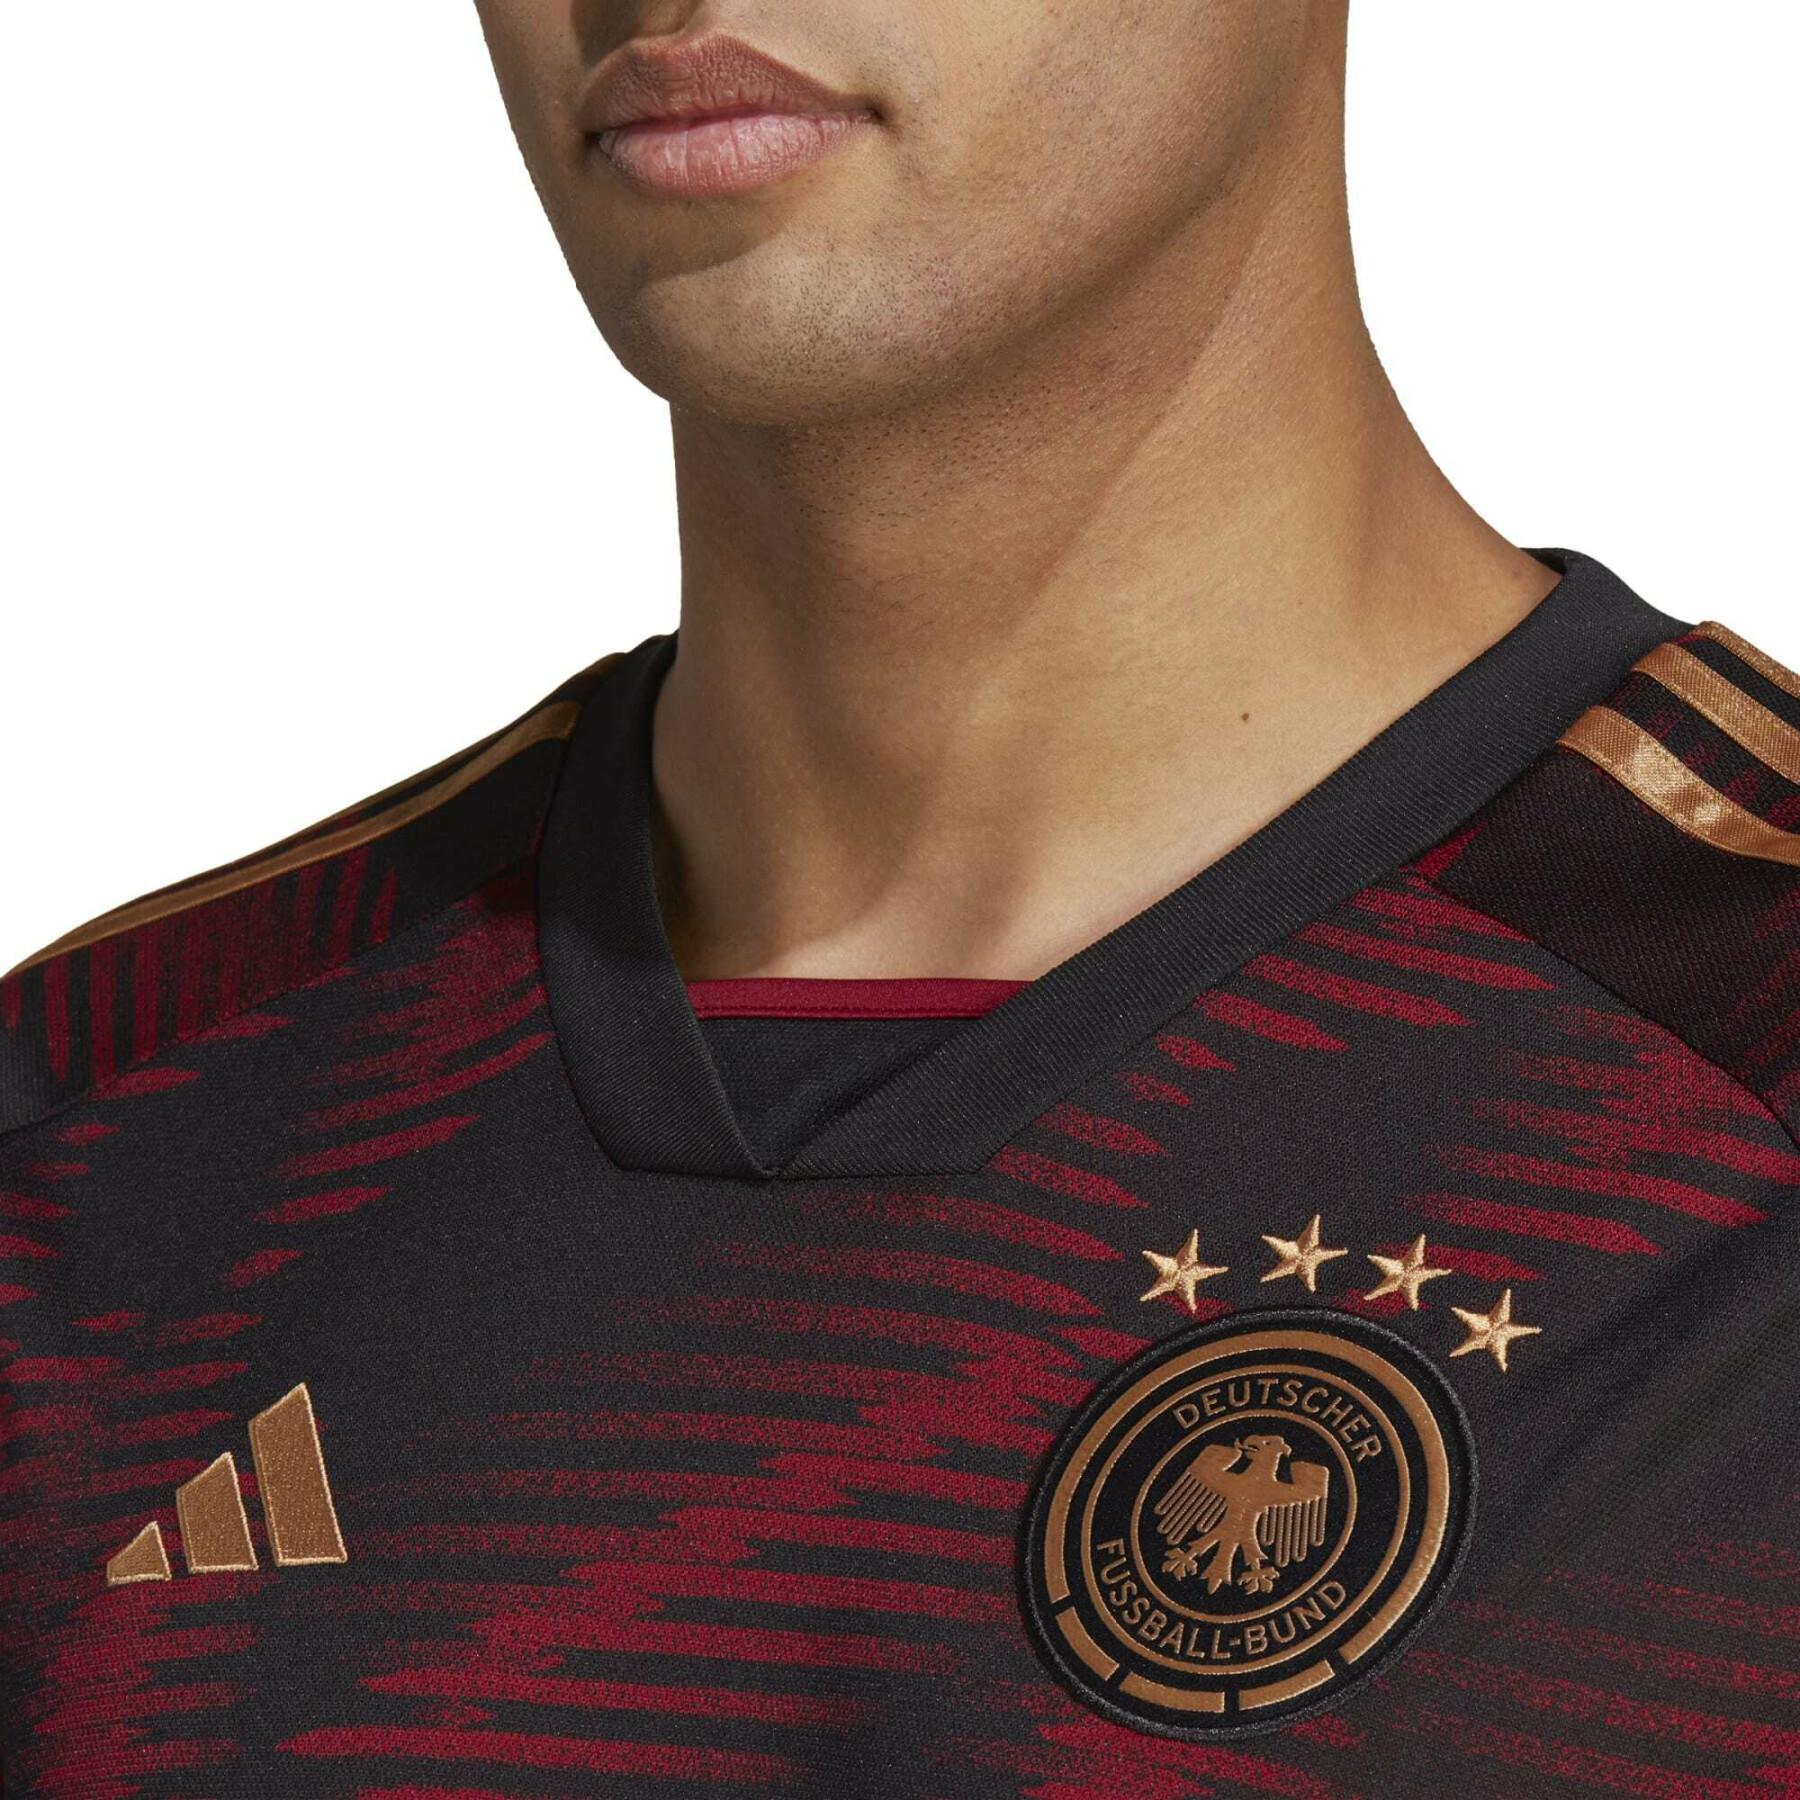 Long sleeve away jersey Allemagne 2022/23